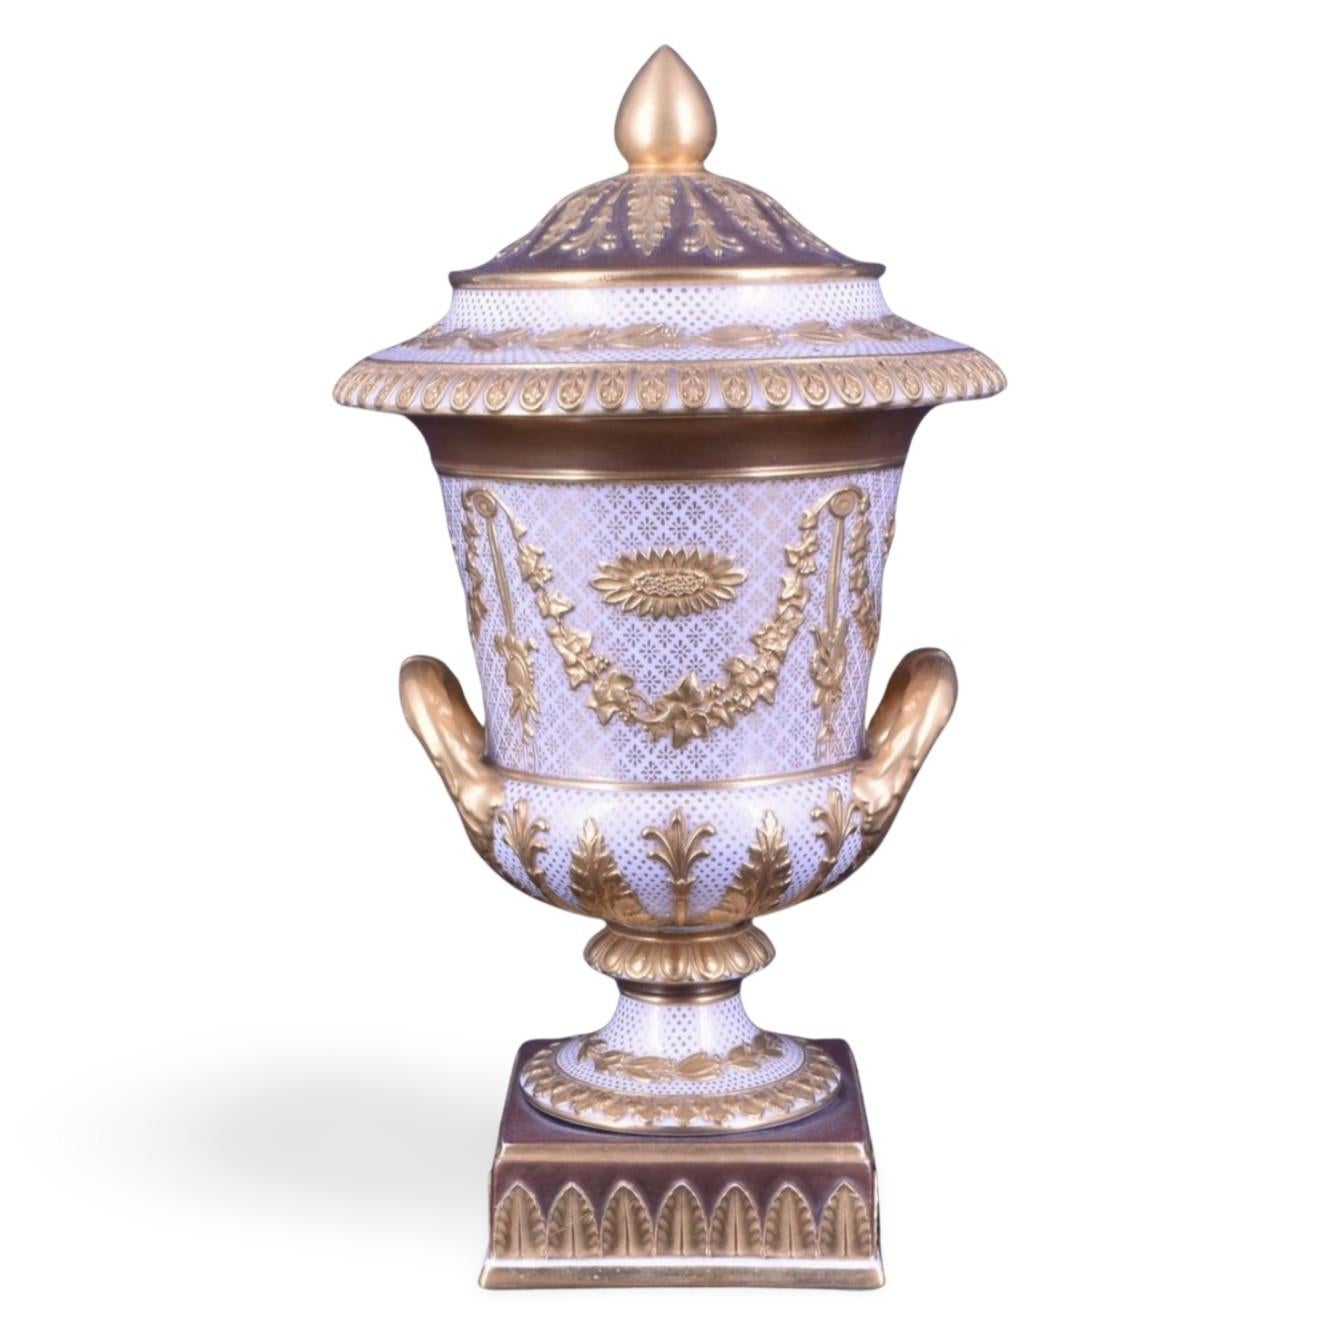 A campana vase in white & gilt Victoriaware. Victoriaware was a mixture of parian and creamware, used to create these extraordinary vases featuring Sevres-style decoration on classical forms. The vase is richly decorated with applied ornament,